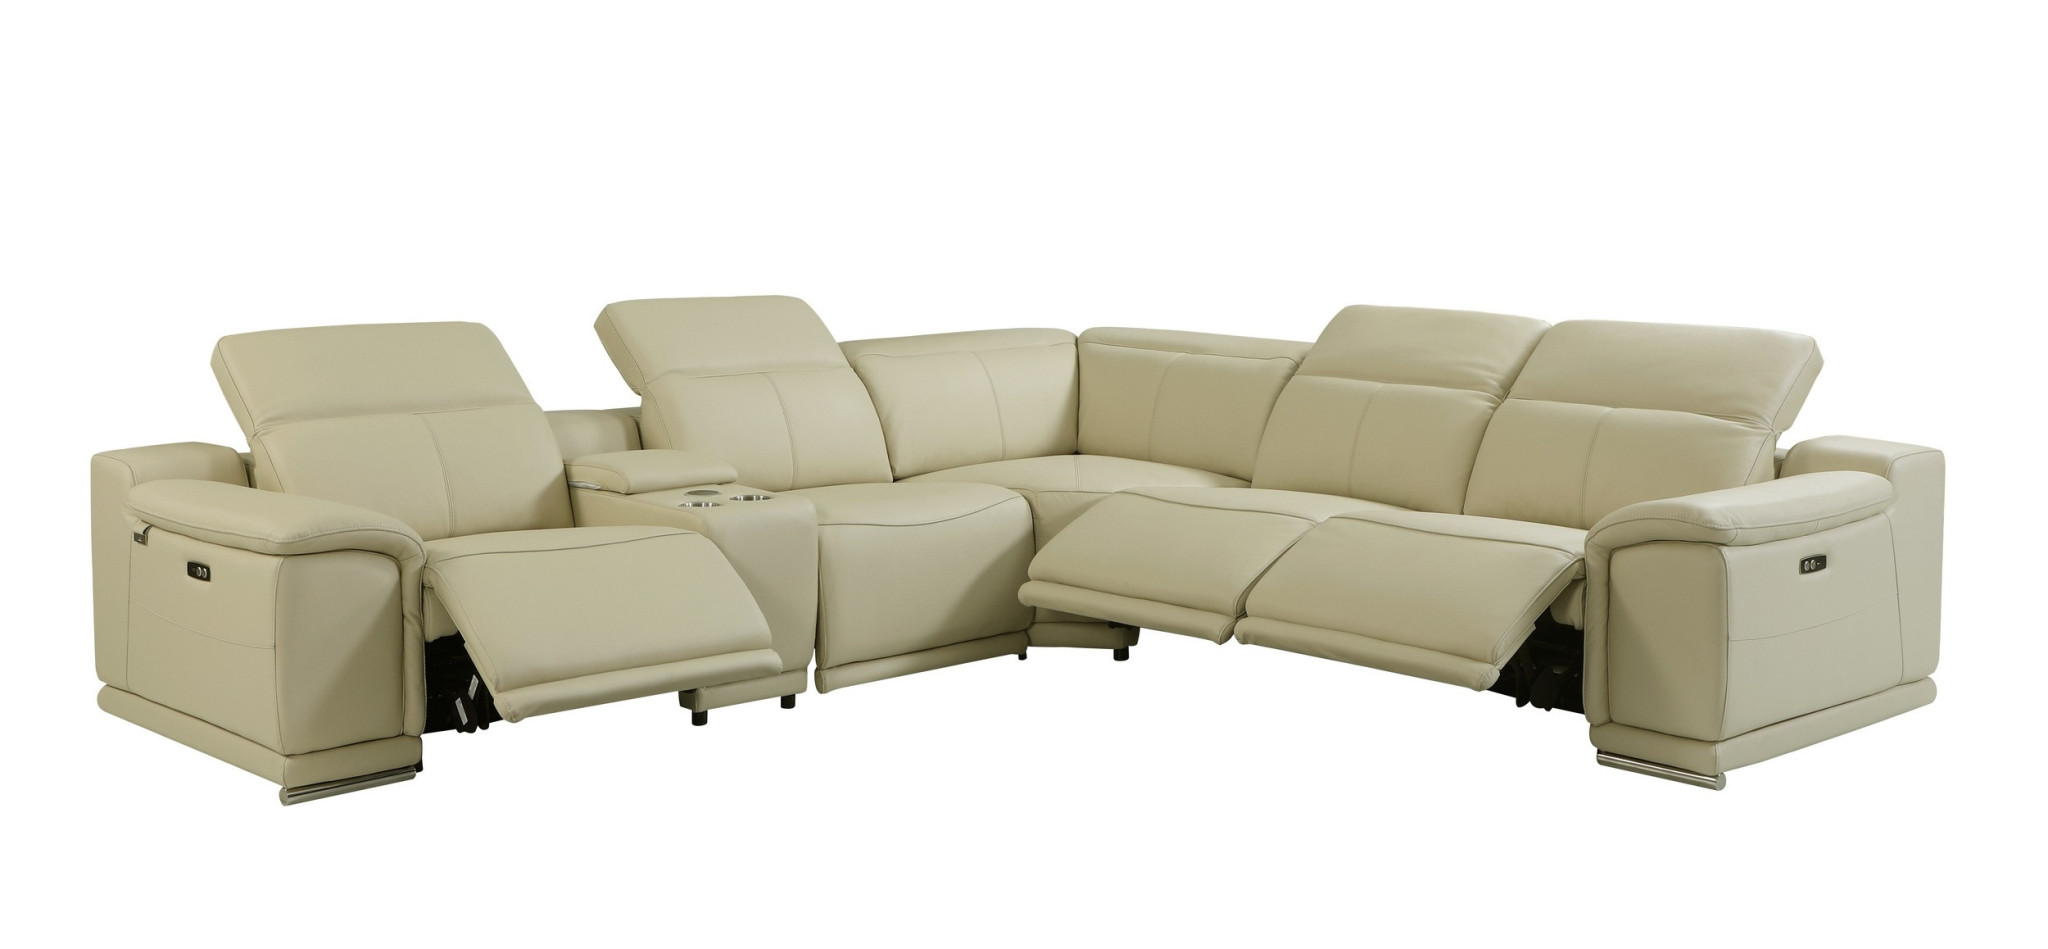 Beige Italian Leather Power Reclining U Shaped Six Piece Corner Sectional With Console-476587-1